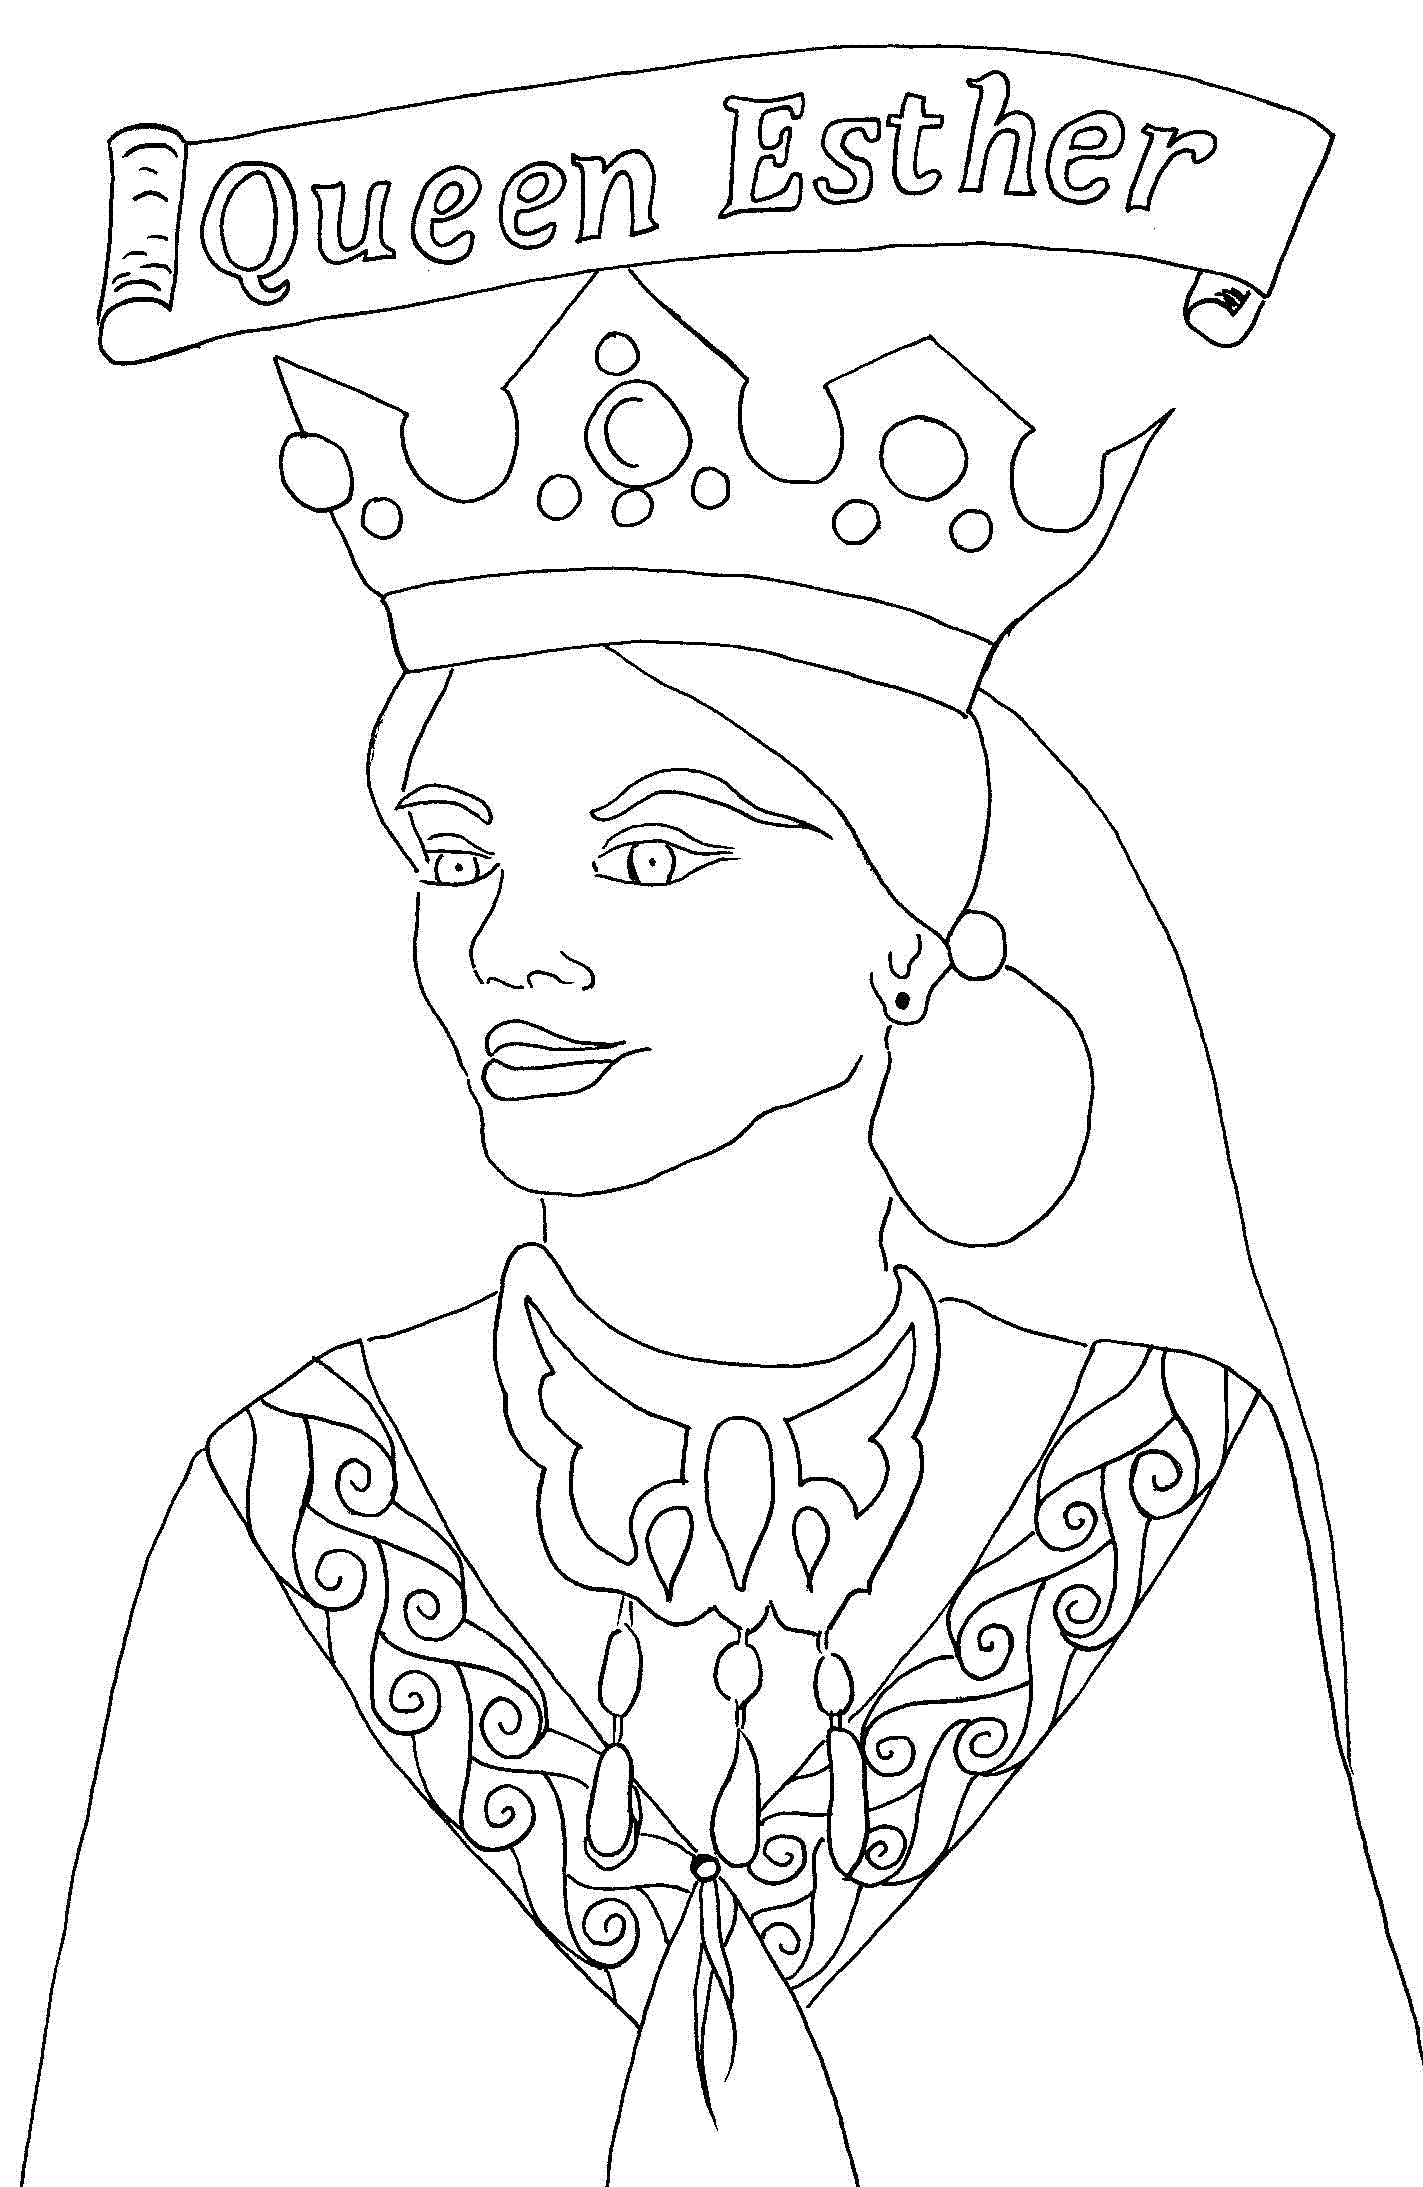 queen esther coloring pages glorious jesus coloring bible coloring free printable queen coloring pages esther 